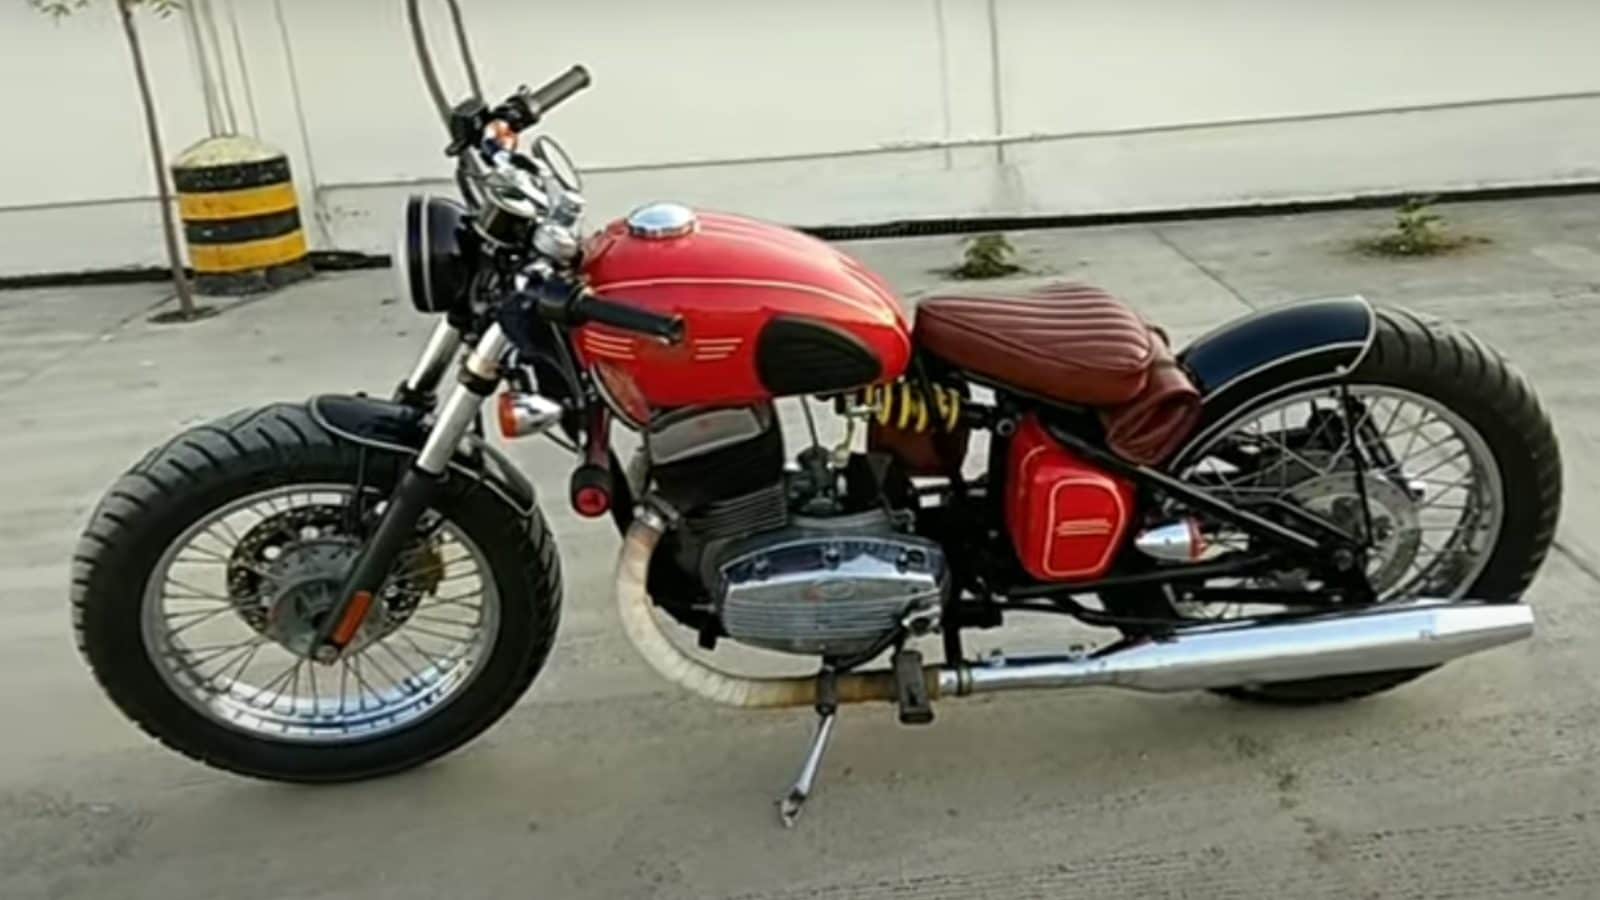 Classic Yezdi Motorcycle Modified into a Bobber: Watch Video